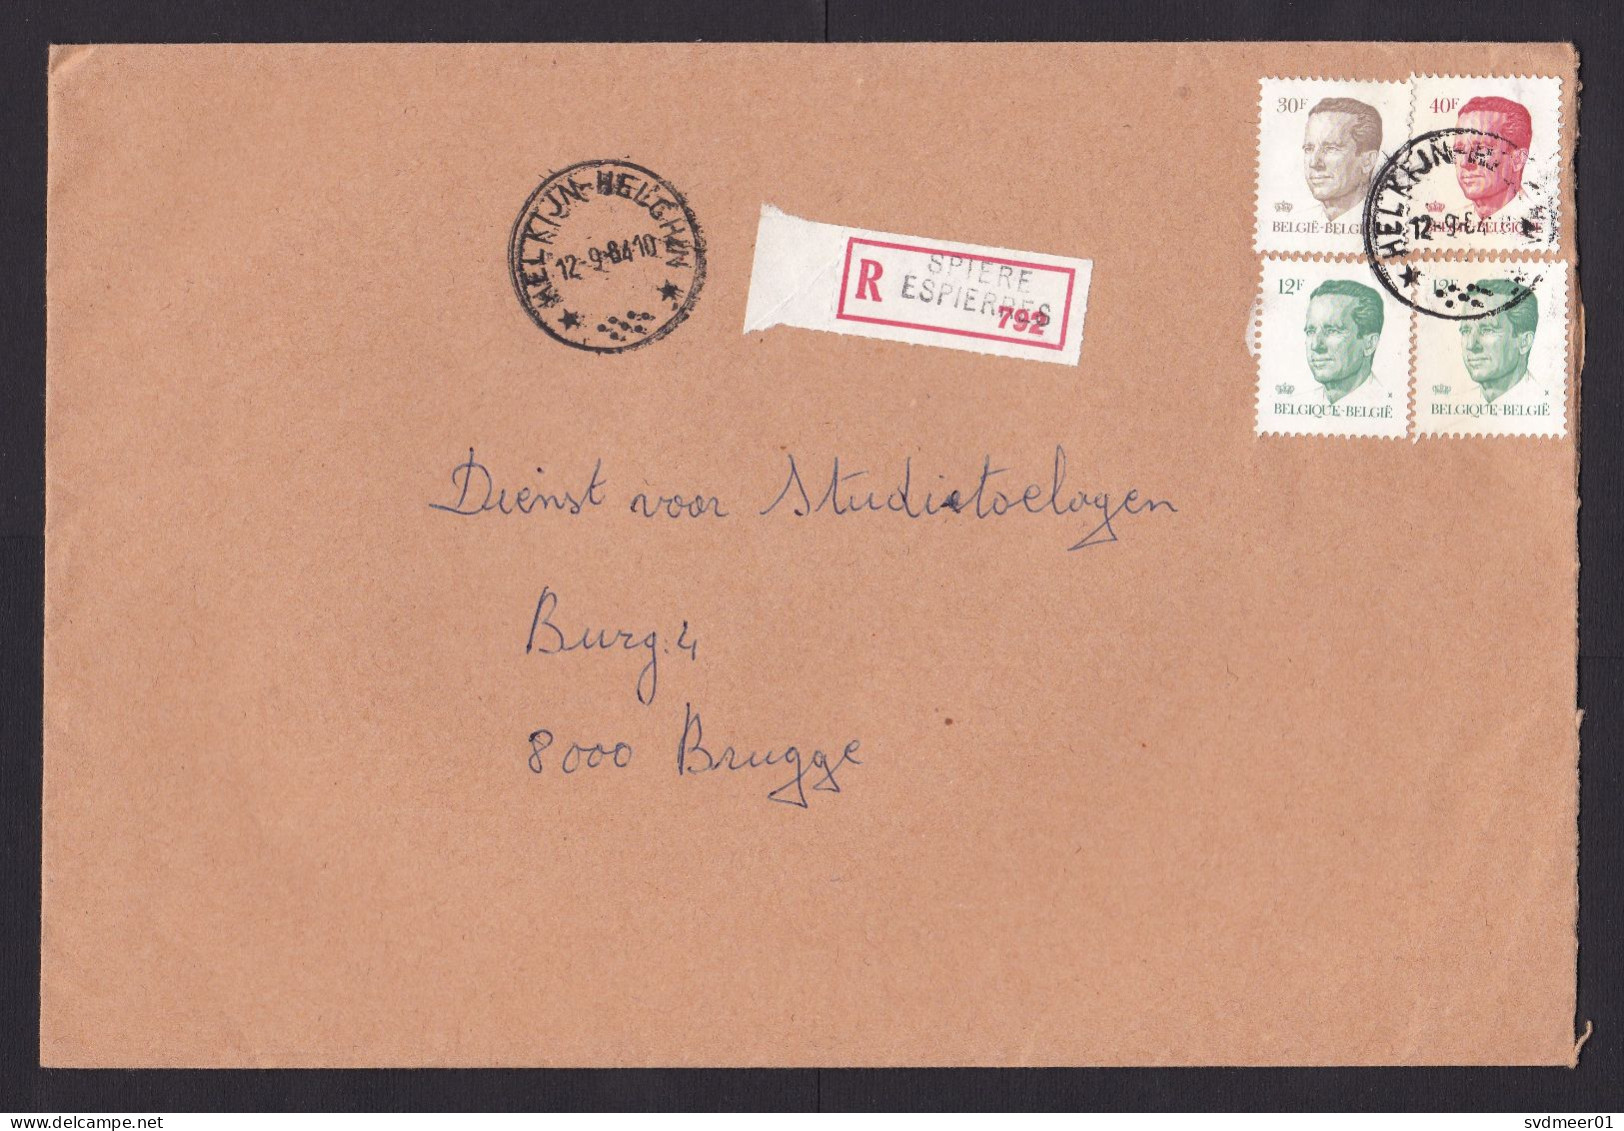 Belgium: Registered Cover, 1984, 4 Stamps, King, Improvised R-label Spiere Espierres (damaged, Discolouring) - Covers & Documents